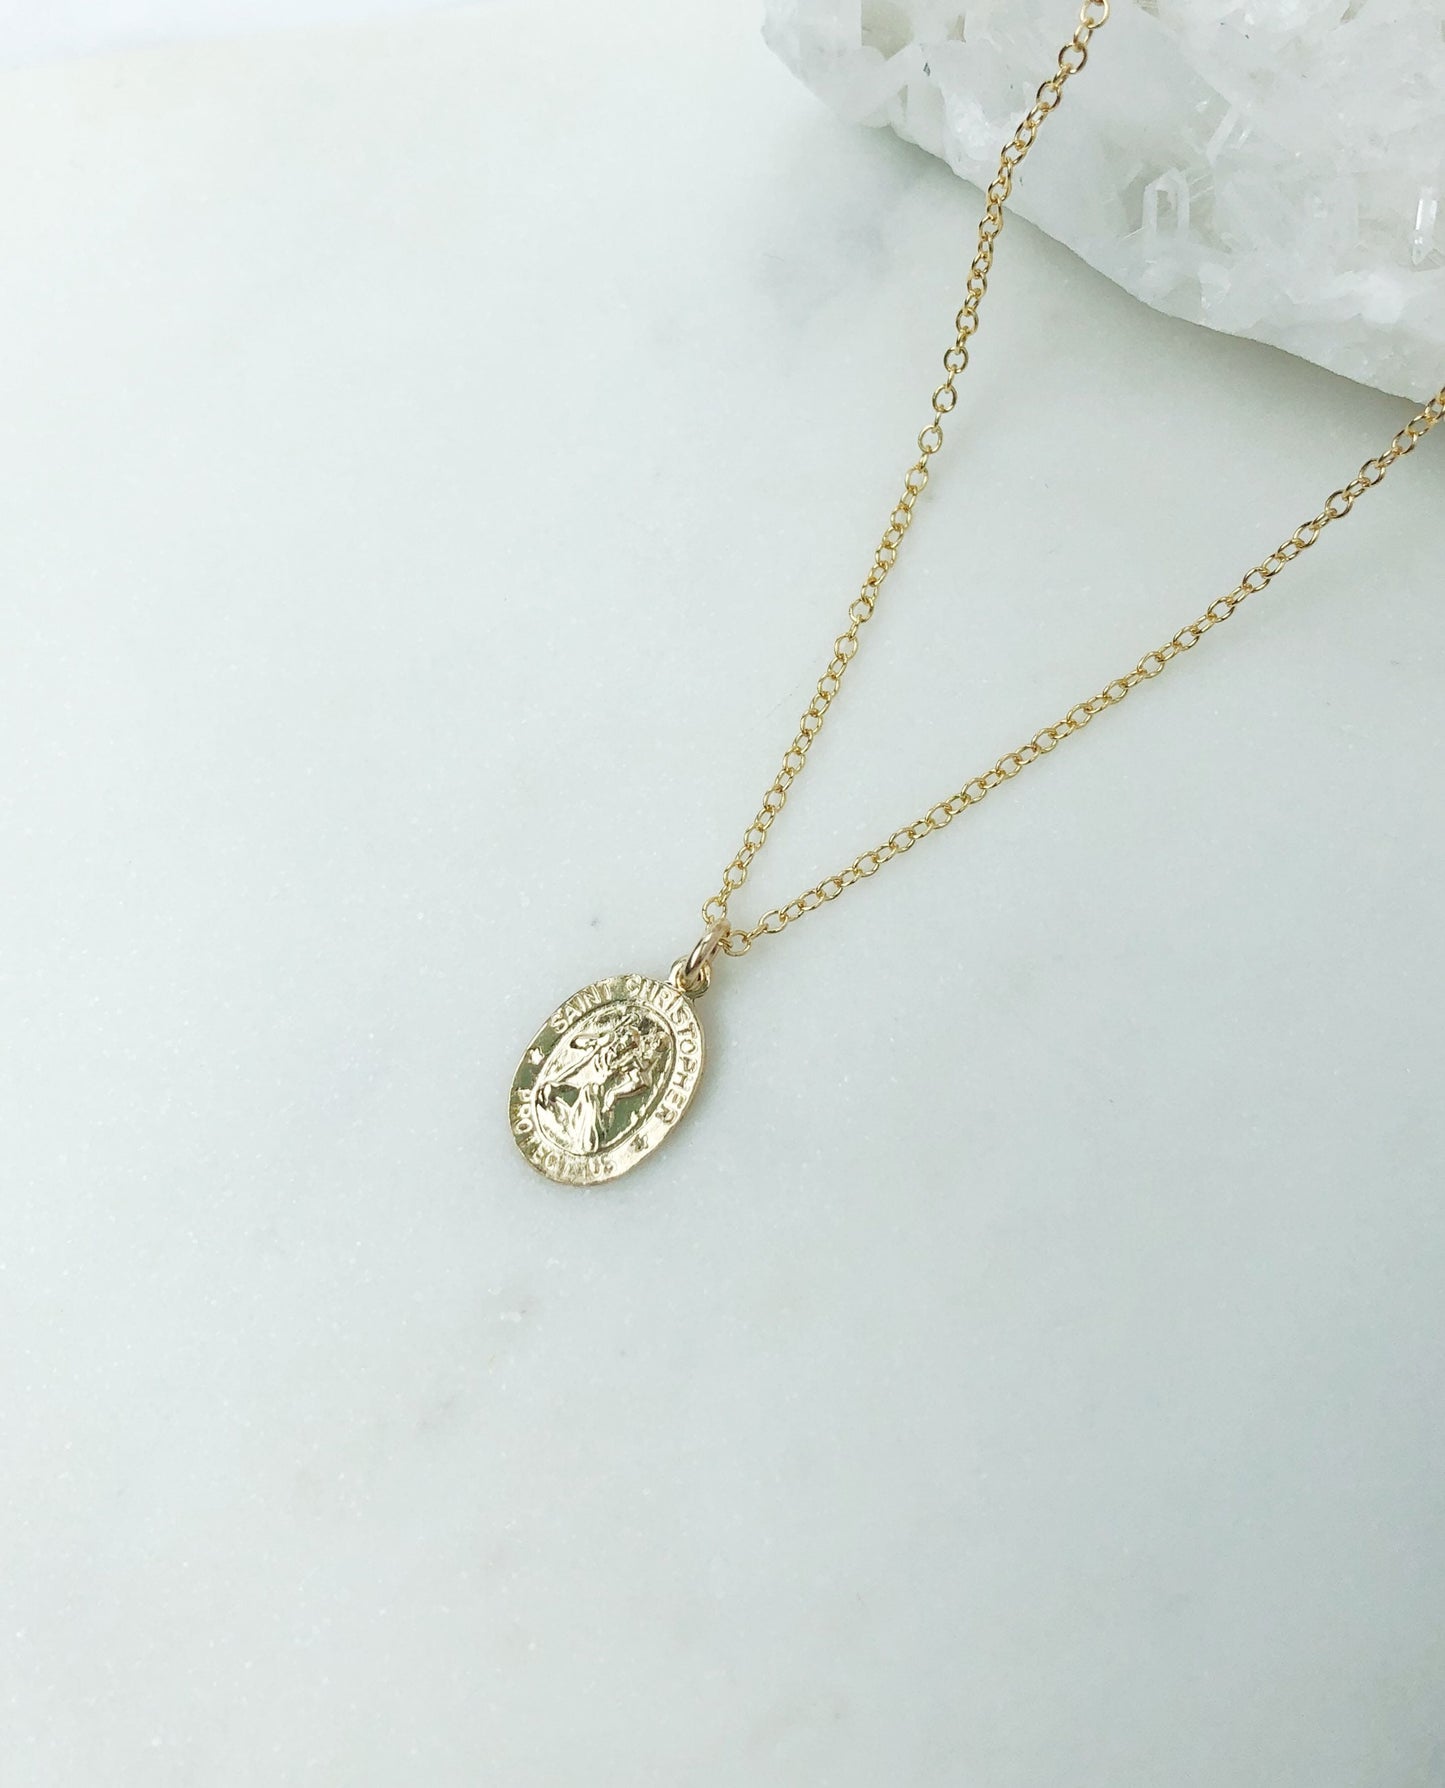 St Christopher Necklace, gold filled necklace, necklaces for women, saint Christopher, religious jewelry, oval necklace, dainty necklace